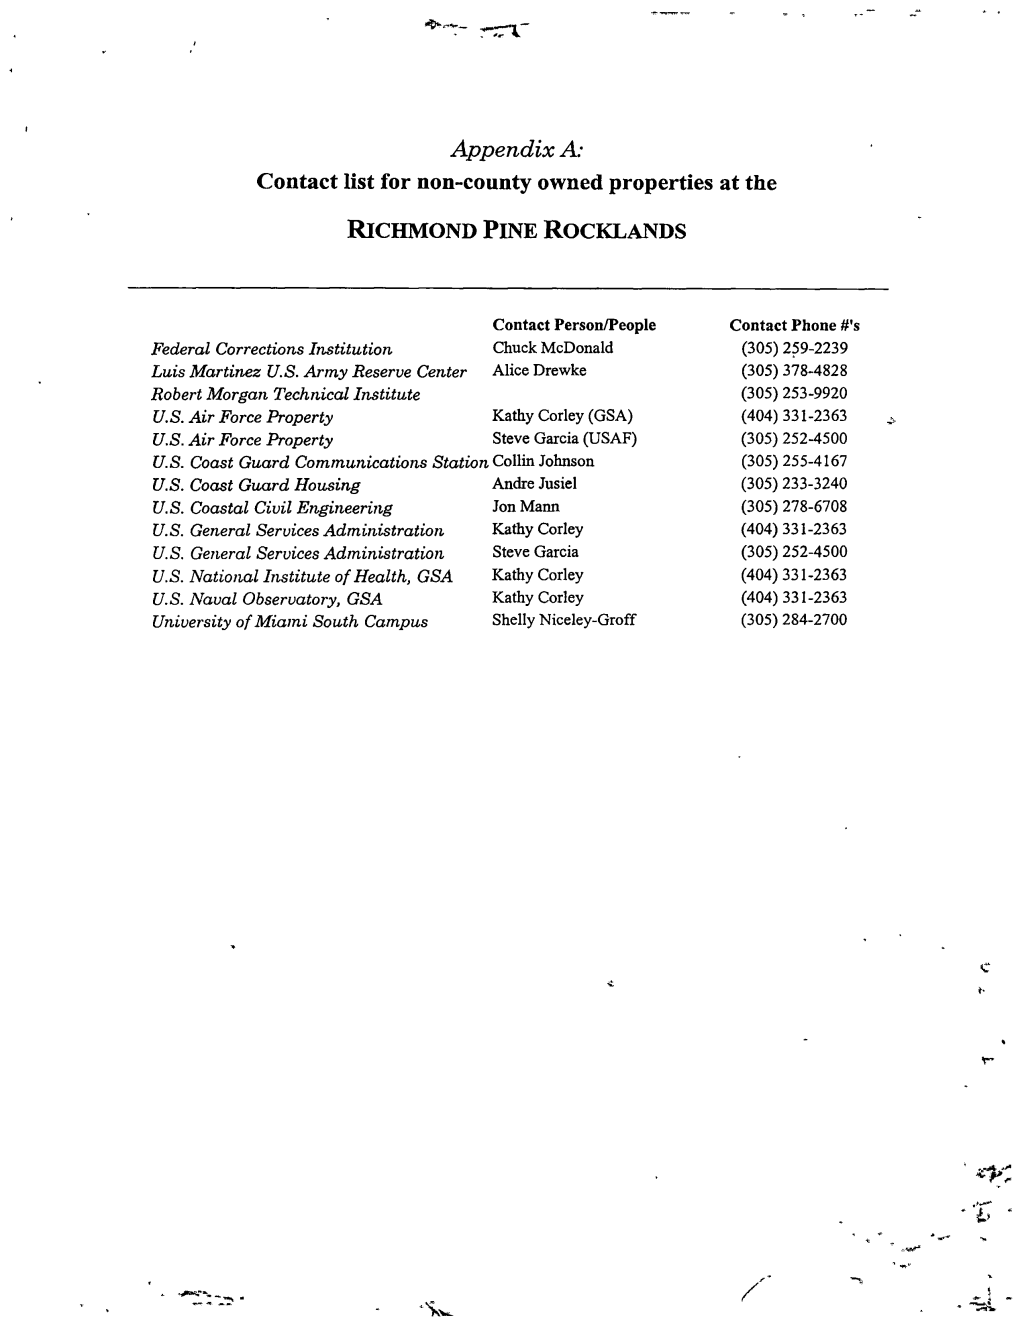 Appendix A: Contact List for Non-County Owned Properties at the RICHMOND PINE ROCKLANDS